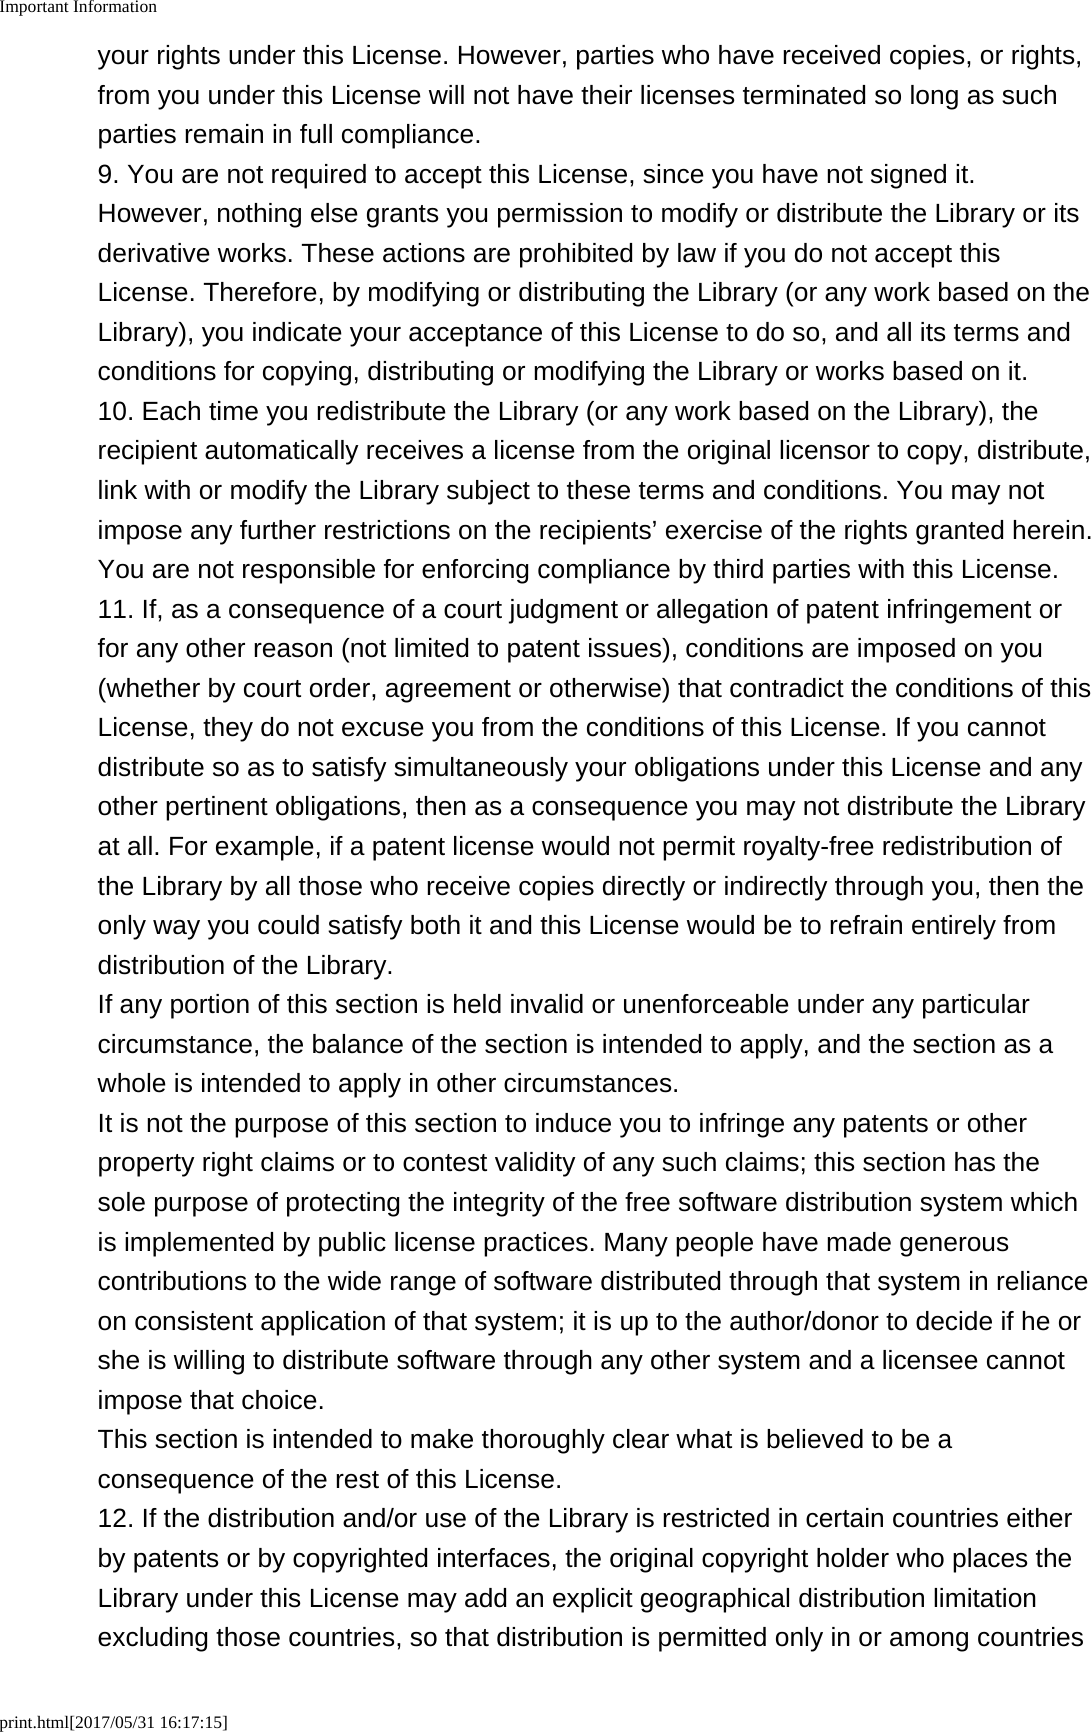 Important Informationprint.html[2017/05/31 16:17:15]your rights under this License. However, parties who have received copies, or rights,from you under this License will not have their licenses terminated so long as suchparties remain in full compliance.9. You are not required to accept this License, since you have not signed it.However, nothing else grants you permission to modify or distribute the Library or itsderivative works. These actions are prohibited by law if you do not accept thisLicense. Therefore, by modifying or distributing the Library (or any work based on theLibrary), you indicate your acceptance of this License to do so, and all its terms andconditions for copying, distributing or modifying the Library or works based on it.10. Each time you redistribute the Library (or any work based on the Library), therecipient automatically receives a license from the original licensor to copy, distribute,link with or modify the Library subject to these terms and conditions. You may notimpose any further restrictions on the recipients’ exercise of the rights granted herein.You are not responsible for enforcing compliance by third parties with this License.11. If, as a consequence of a court judgment or allegation of patent infringement orfor any other reason (not limited to patent issues), conditions are imposed on you(whether by court order, agreement or otherwise) that contradict the conditions of thisLicense, they do not excuse you from the conditions of this License. If you cannotdistribute so as to satisfy simultaneously your obligations under this License and anyother pertinent obligations, then as a consequence you may not distribute the Libraryat all. For example, if a patent license would not permit royalty-free redistribution ofthe Library by all those who receive copies directly or indirectly through you, then theonly way you could satisfy both it and this License would be to refrain entirely fromdistribution of the Library.If any portion of this section is held invalid or unenforceable under any particularcircumstance, the balance of the section is intended to apply, and the section as awhole is intended to apply in other circumstances.It is not the purpose of this section to induce you to infringe any patents or otherproperty right claims or to contest validity of any such claims; this section has thesole purpose of protecting the integrity of the free software distribution system whichis implemented by public license practices. Many people have made generouscontributions to the wide range of software distributed through that system in relianceon consistent application of that system; it is up to the author/donor to decide if he orshe is willing to distribute software through any other system and a licensee cannotimpose that choice.This section is intended to make thoroughly clear what is believed to be aconsequence of the rest of this License.12. If the distribution and/or use of the Library is restricted in certain countries eitherby patents or by copyrighted interfaces, the original copyright holder who places theLibrary under this License may add an explicit geographical distribution limitationexcluding those countries, so that distribution is permitted only in or among countries